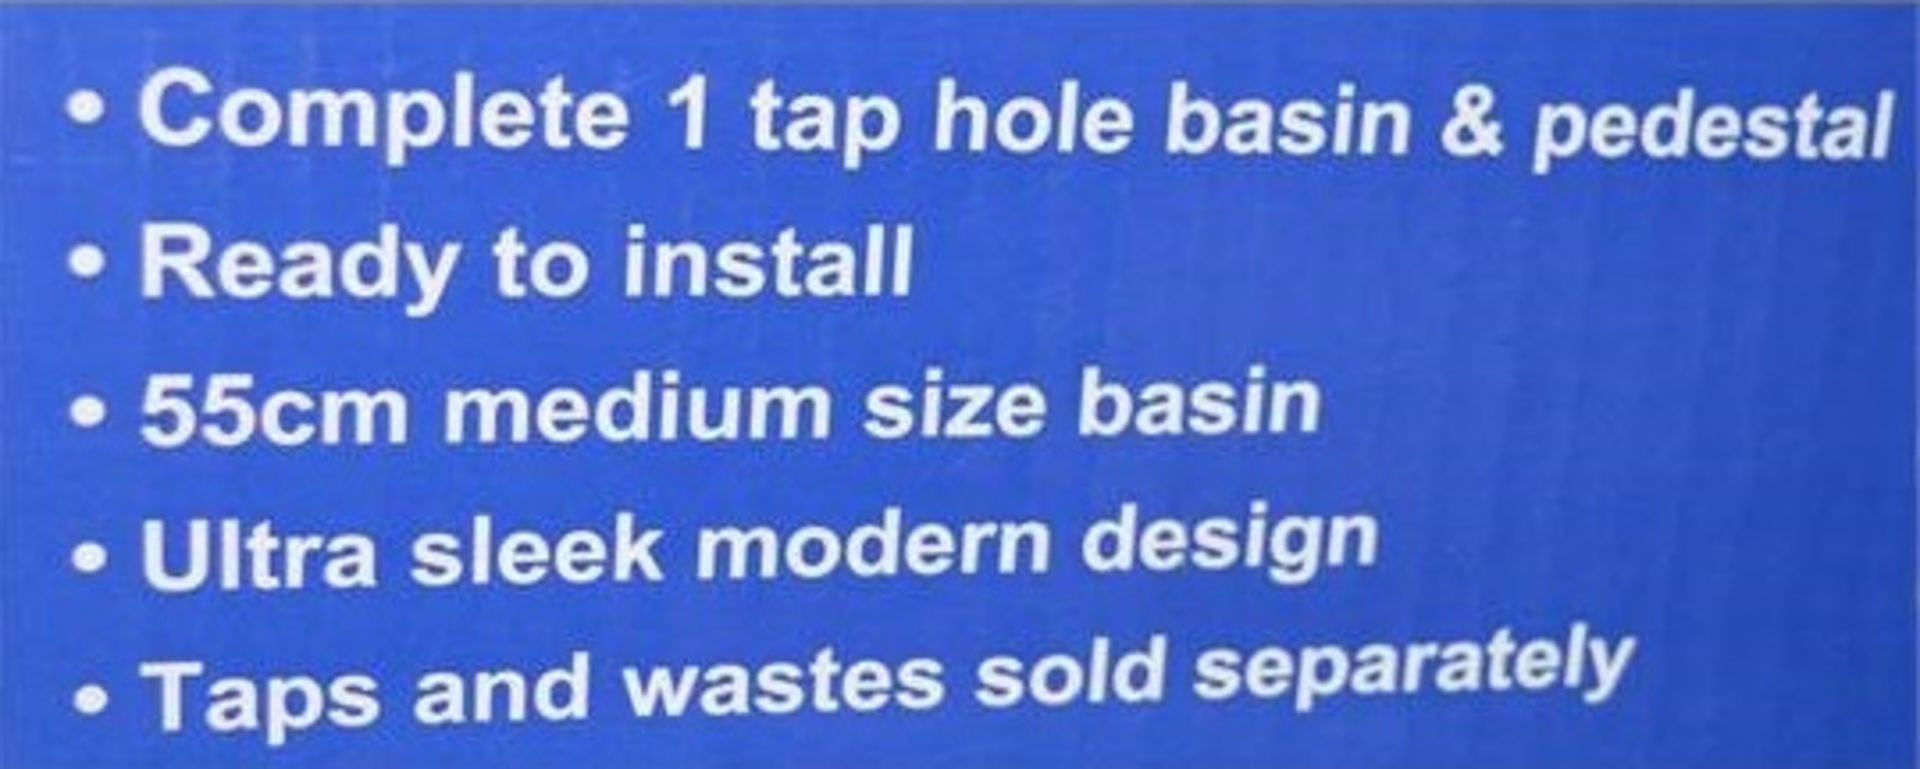 1 x Delux Xpress 1 Tap Hole 550mm Bathroom Sink Basin with Pedestal - Brand New and Boxed - Ultra - Image 3 of 3